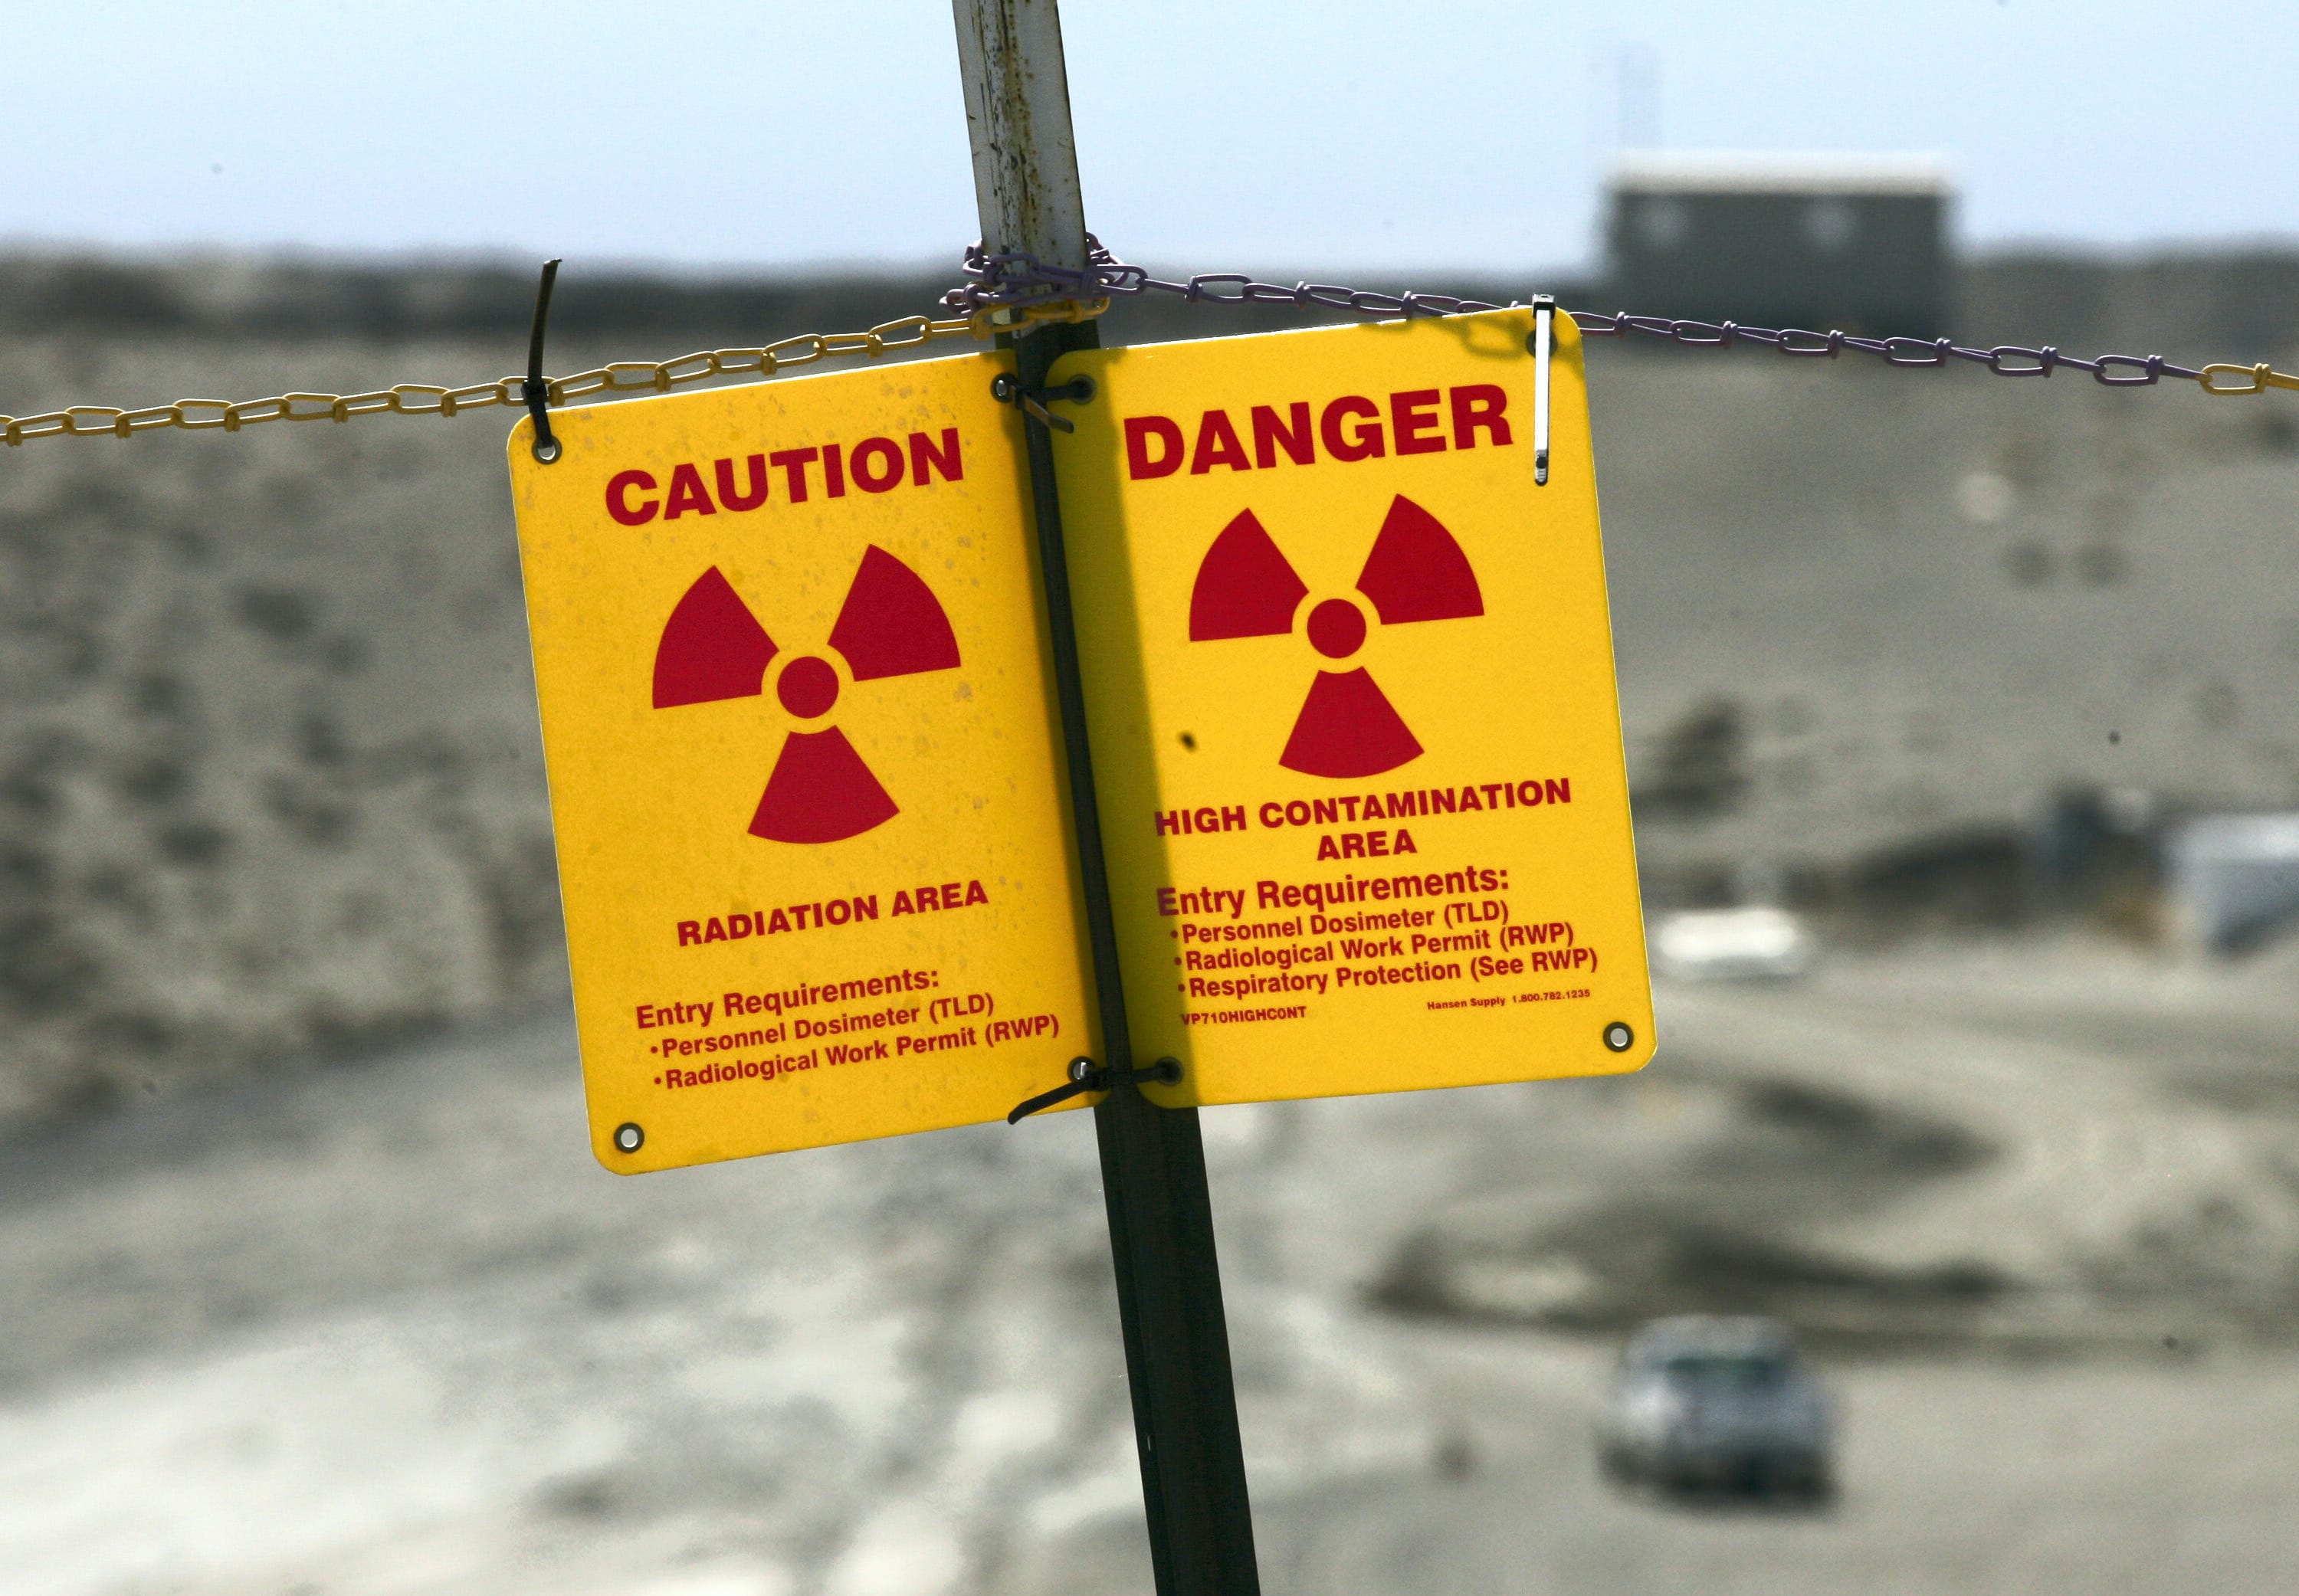 A sign warns of radiation on the Hanford nuclear reservation, which houses Washington's only operating nuclear power plant.